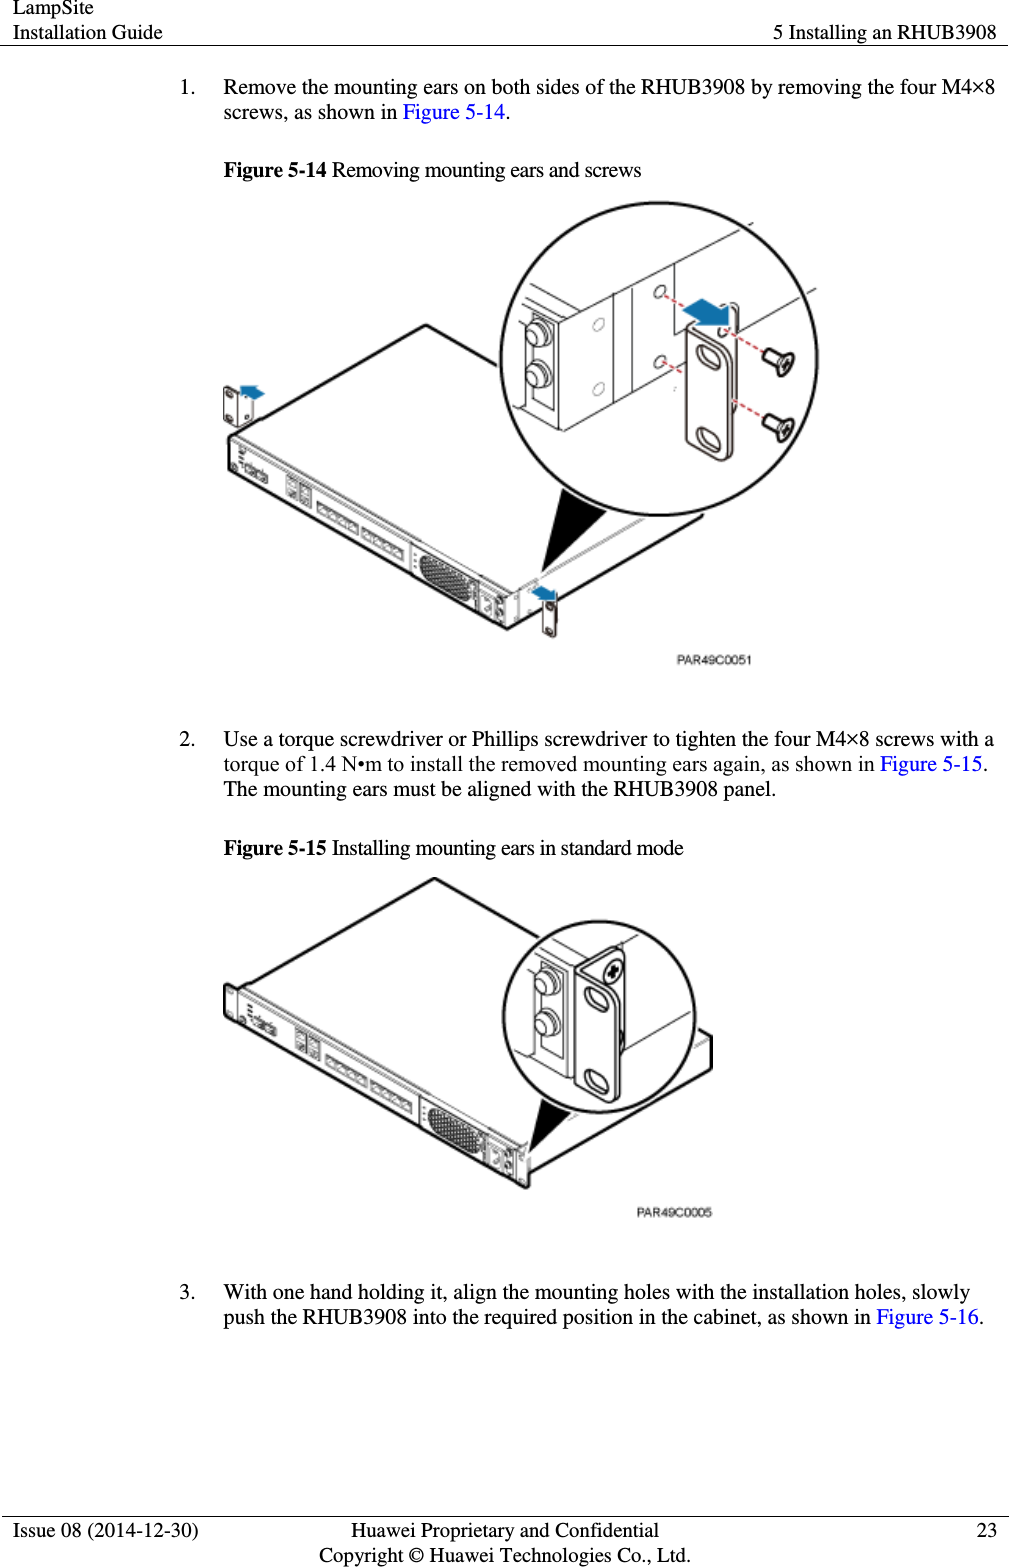 LampSite Installation Guide 5 Installing an RHUB3908  Issue 08 (2014-12-30) Huawei Proprietary and Confidential                                     Copyright © Huawei Technologies Co., Ltd. 23  1. Remove the mounting ears on both sides of the RHUB3908 by removing the four M4×8 screws, as shown in Figure 5-14.   Figure 5-14 Removing mounting ears and screws   2. Use a torque screwdriver or Phillips screwdriver to tighten the four M4×8 screws with a torque of 1.4 N•m to install the removed mounting ears again, as shown in Figure 5-15. The mounting ears must be aligned with the RHUB3908 panel.   Figure 5-15 Installing mounting ears in standard mode   3. With one hand holding it, align the mounting holes with the installation holes, slowly push the RHUB3908 into the required position in the cabinet, as shown in Figure 5-16.   